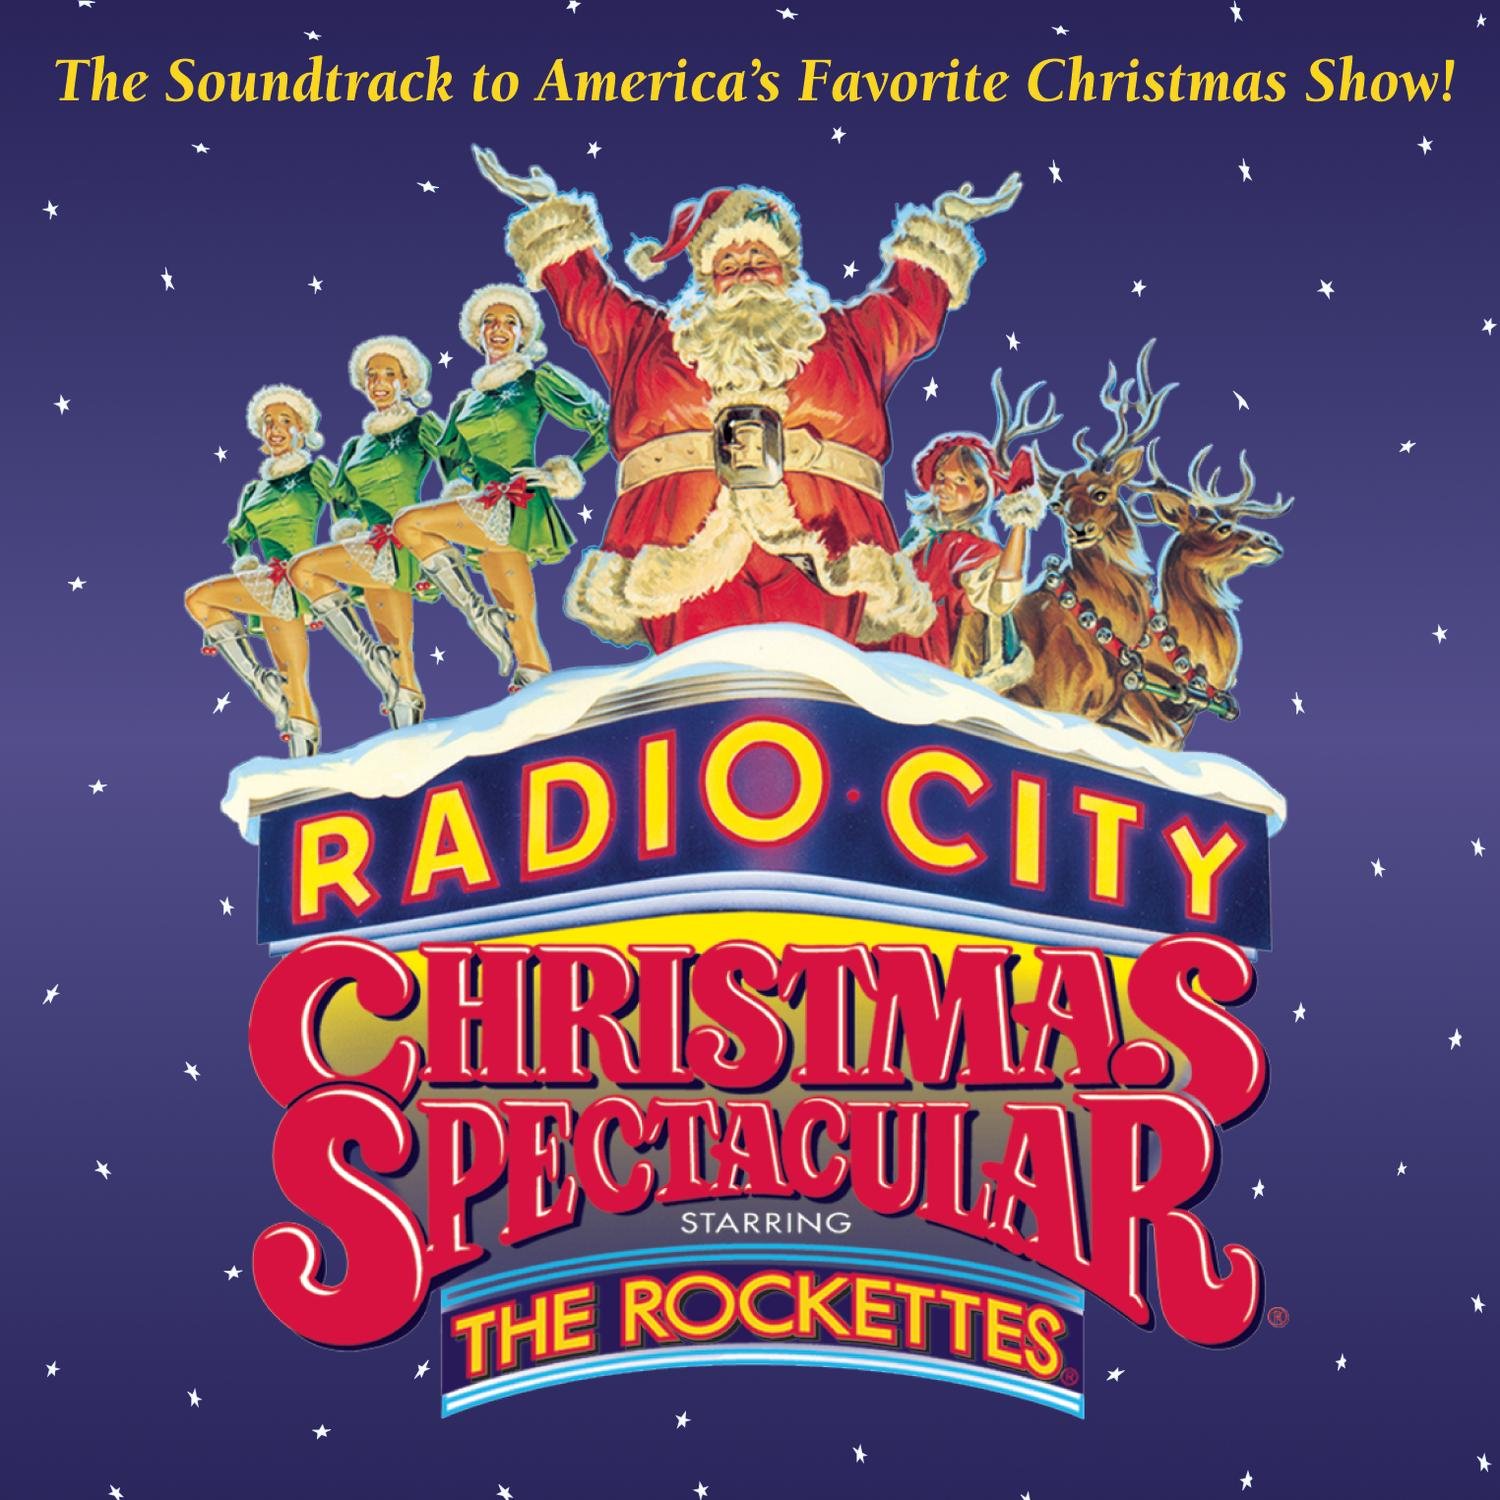 All tickets for Christmas Spectacular